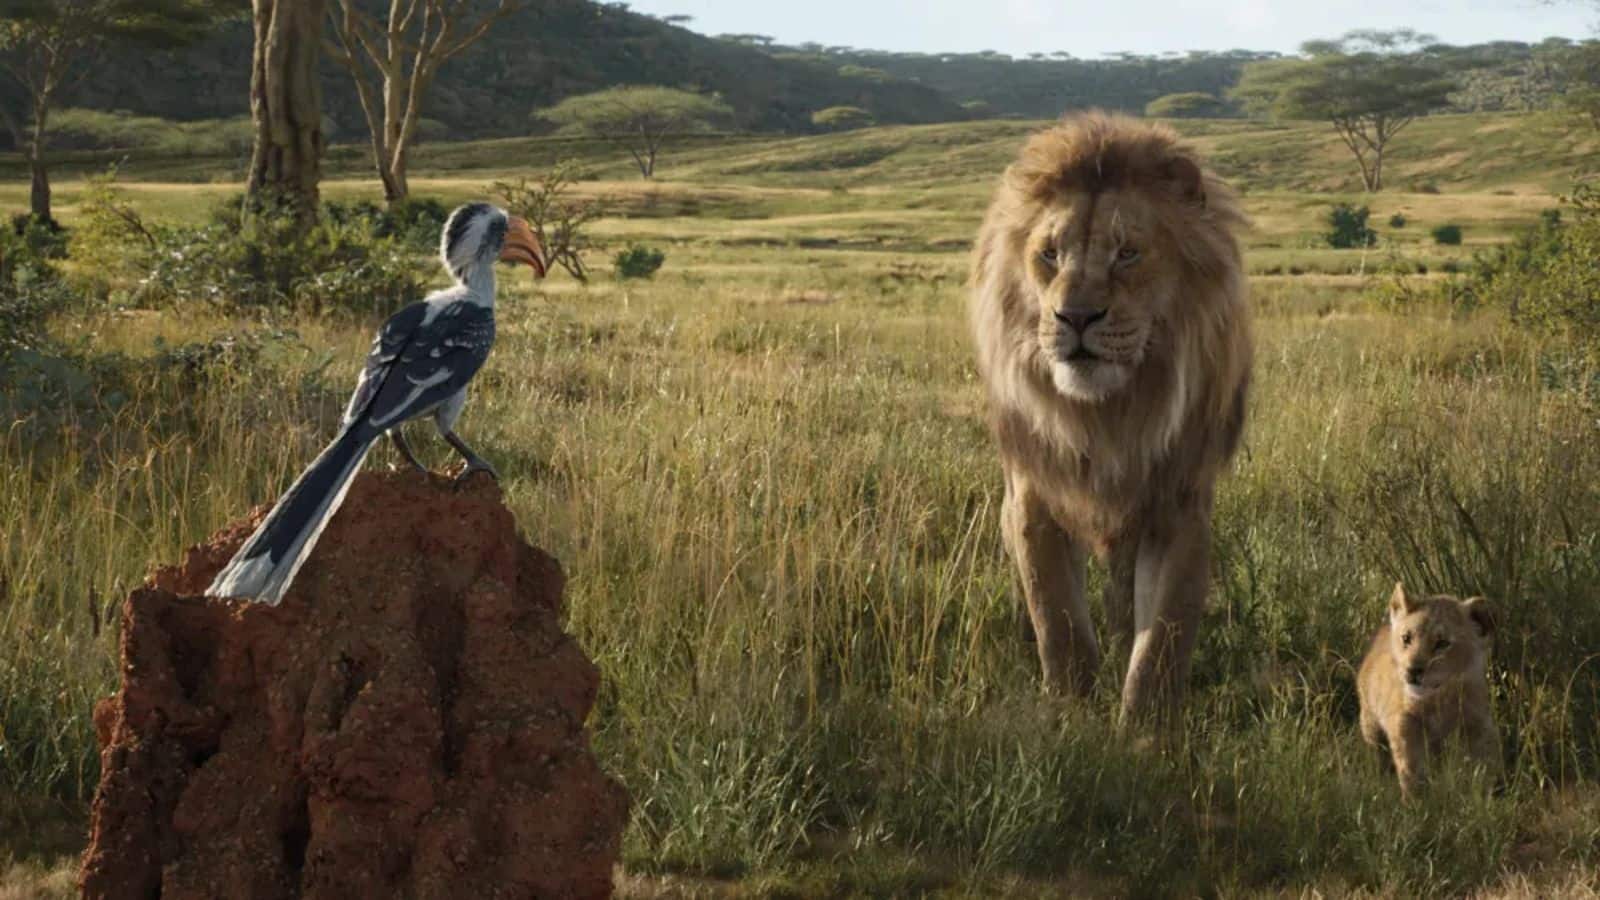 'Mufasa: The Lion King' trailer infuses majestic visuals with nostalgia